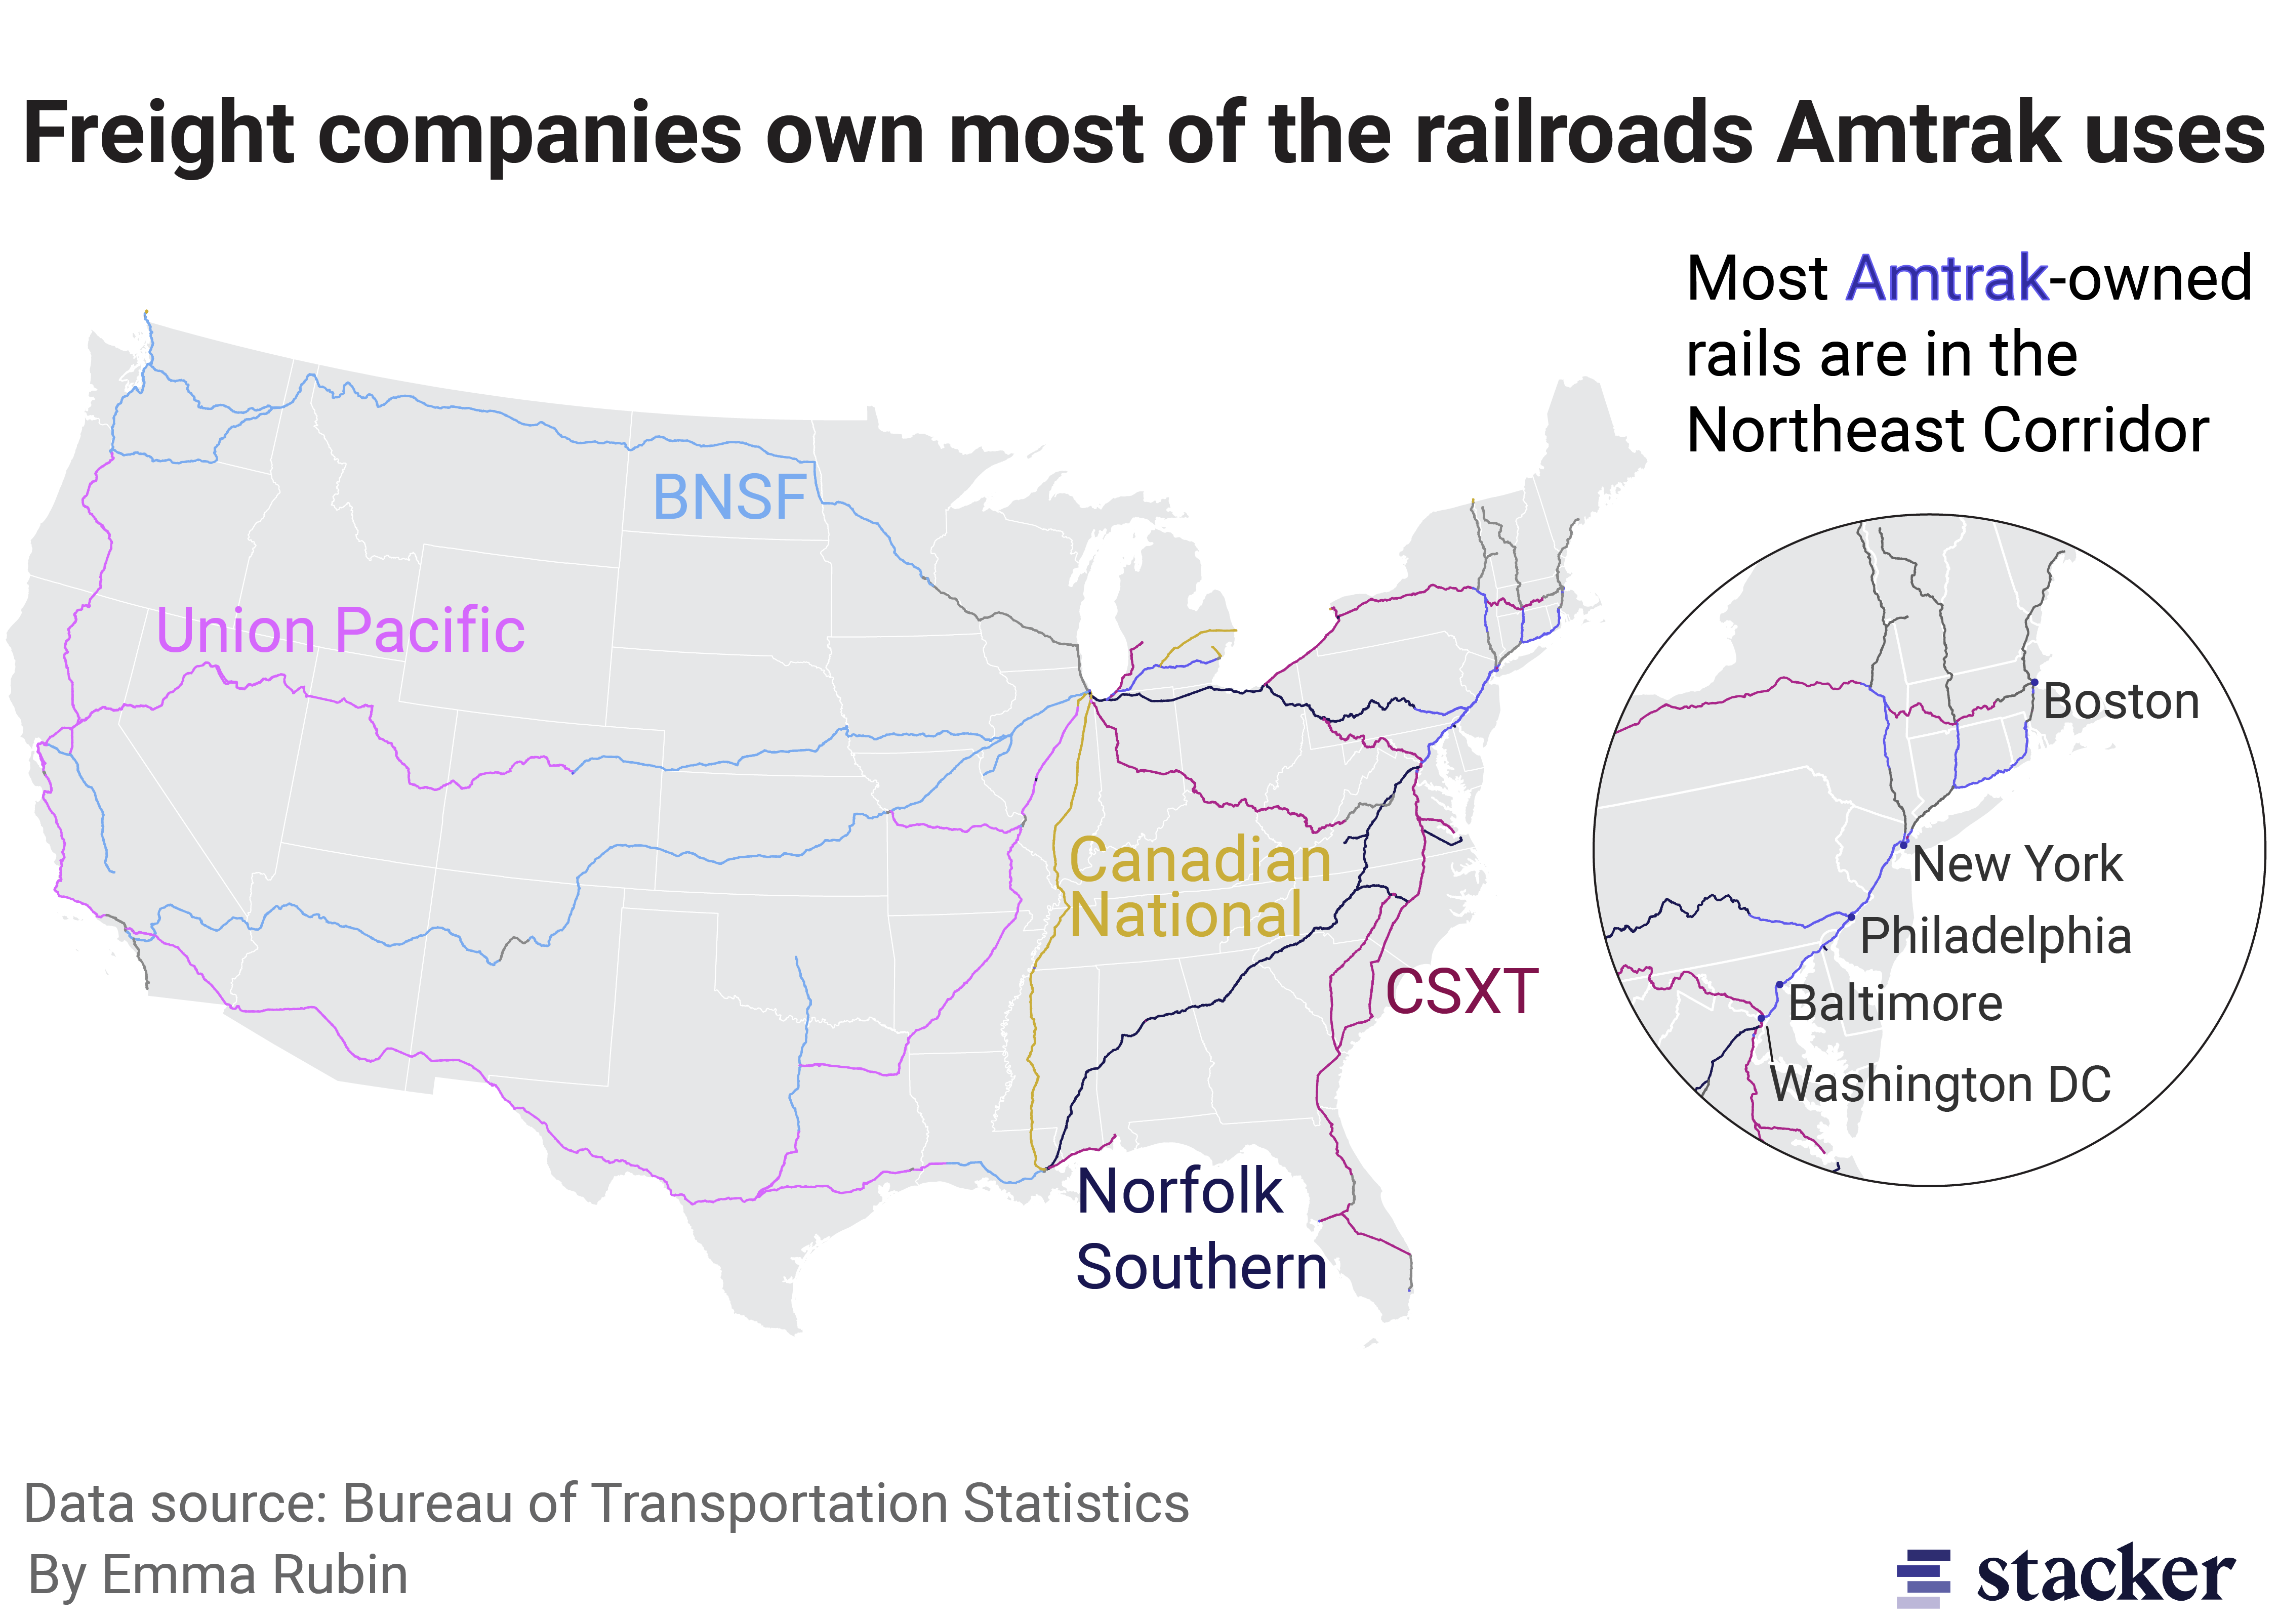 Map of Amtrak routes color coded by rail ownership. Amtrak does not own the majority of the rail it uses.